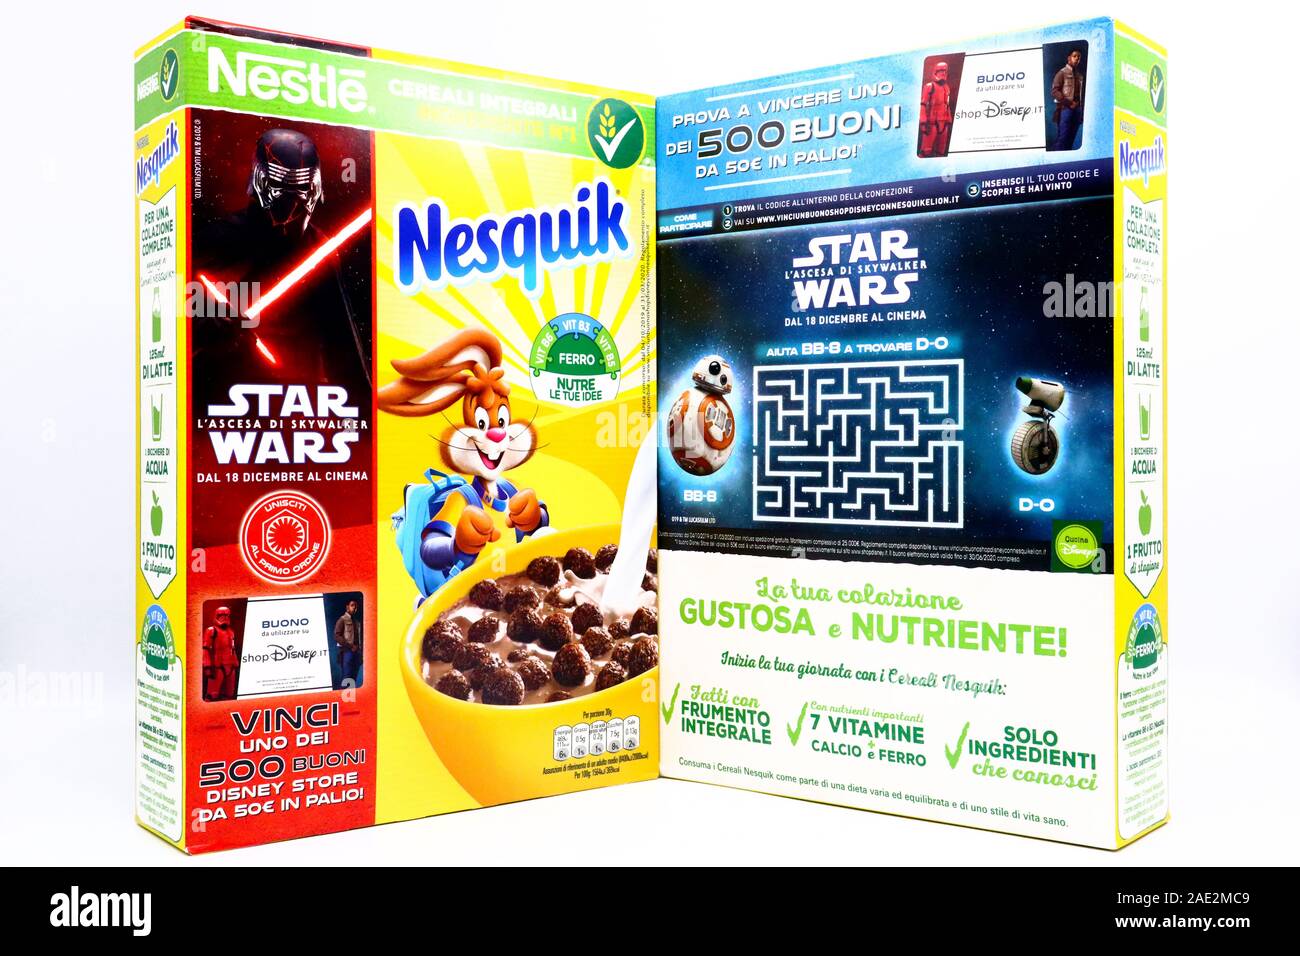 NESQUIK Nestlé promotional Cereals box for the movie STAR WARS The Rise of Skywalker Stock Photo